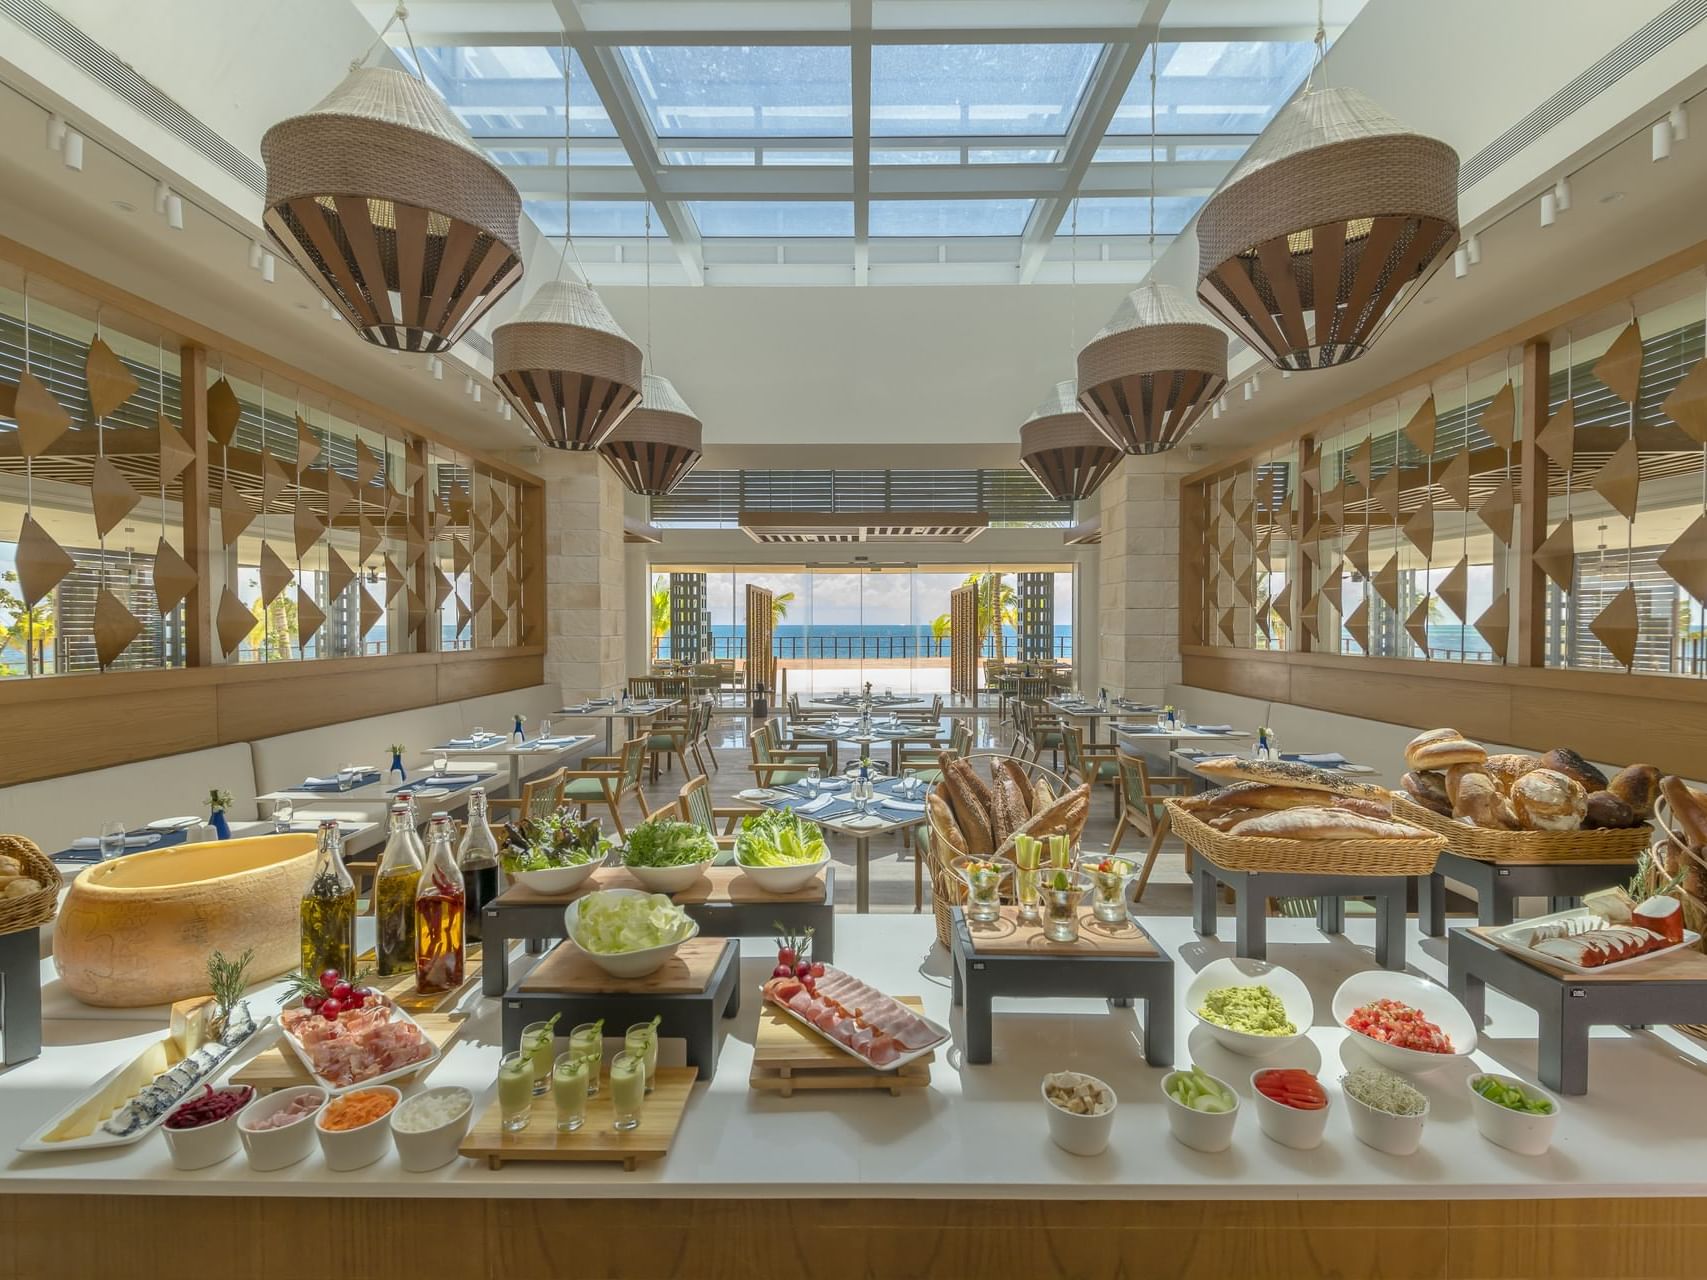 Variety of bread, fruits & smoothies at the buffet spread of Vora Mar Restaurant at Haven Riviera Cancun